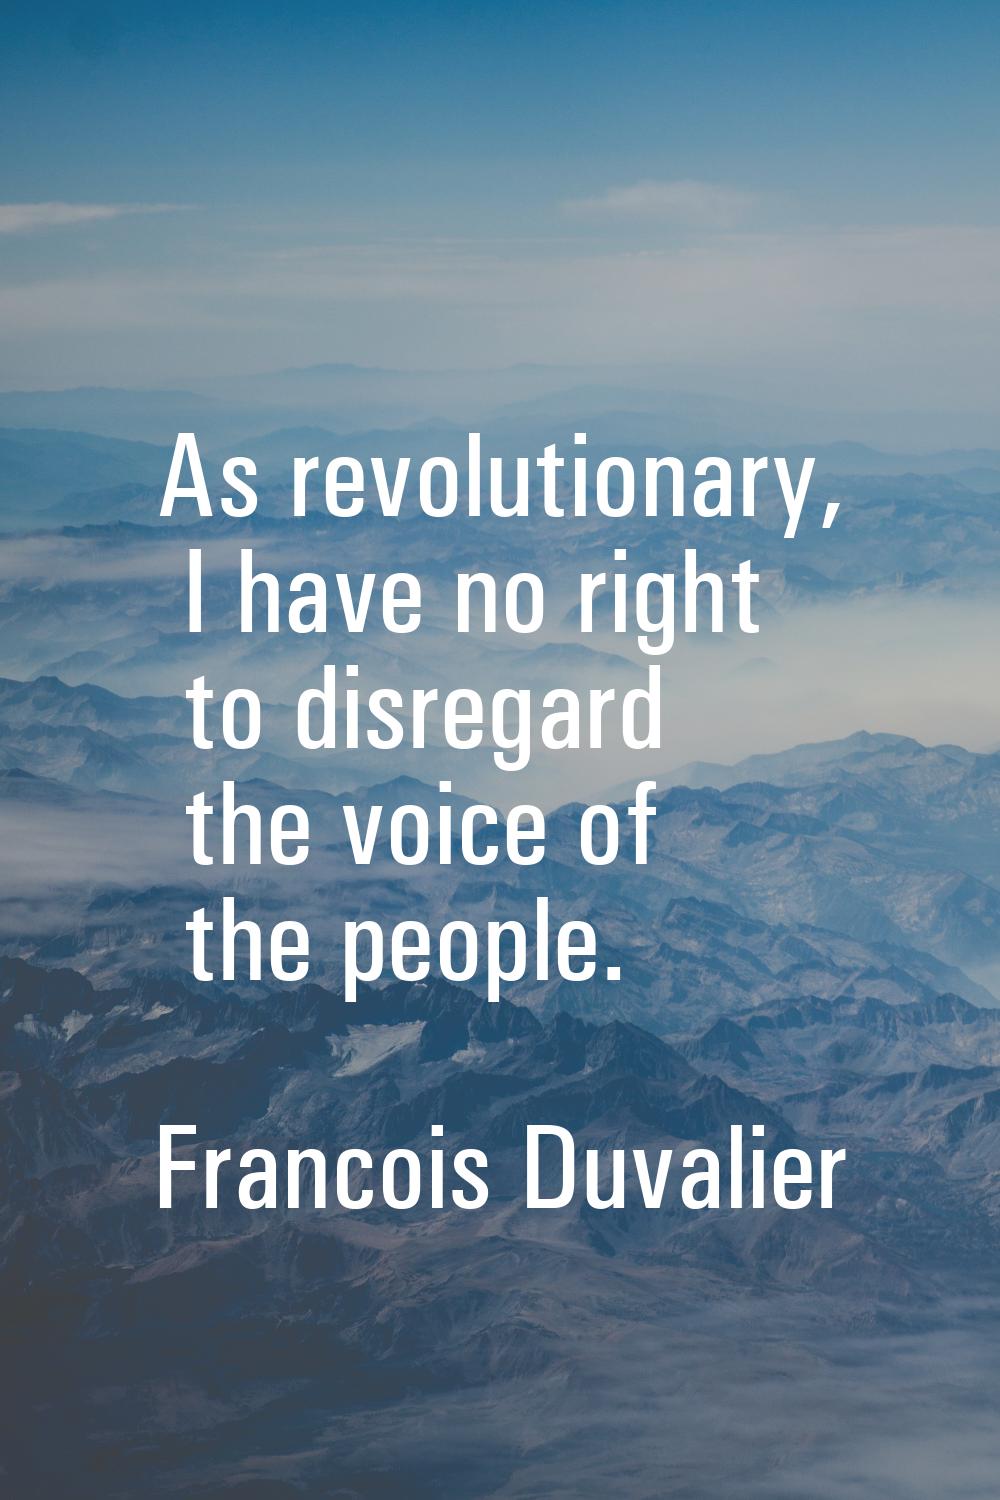 As revolutionary, I have no right to disregard the voice of the people.